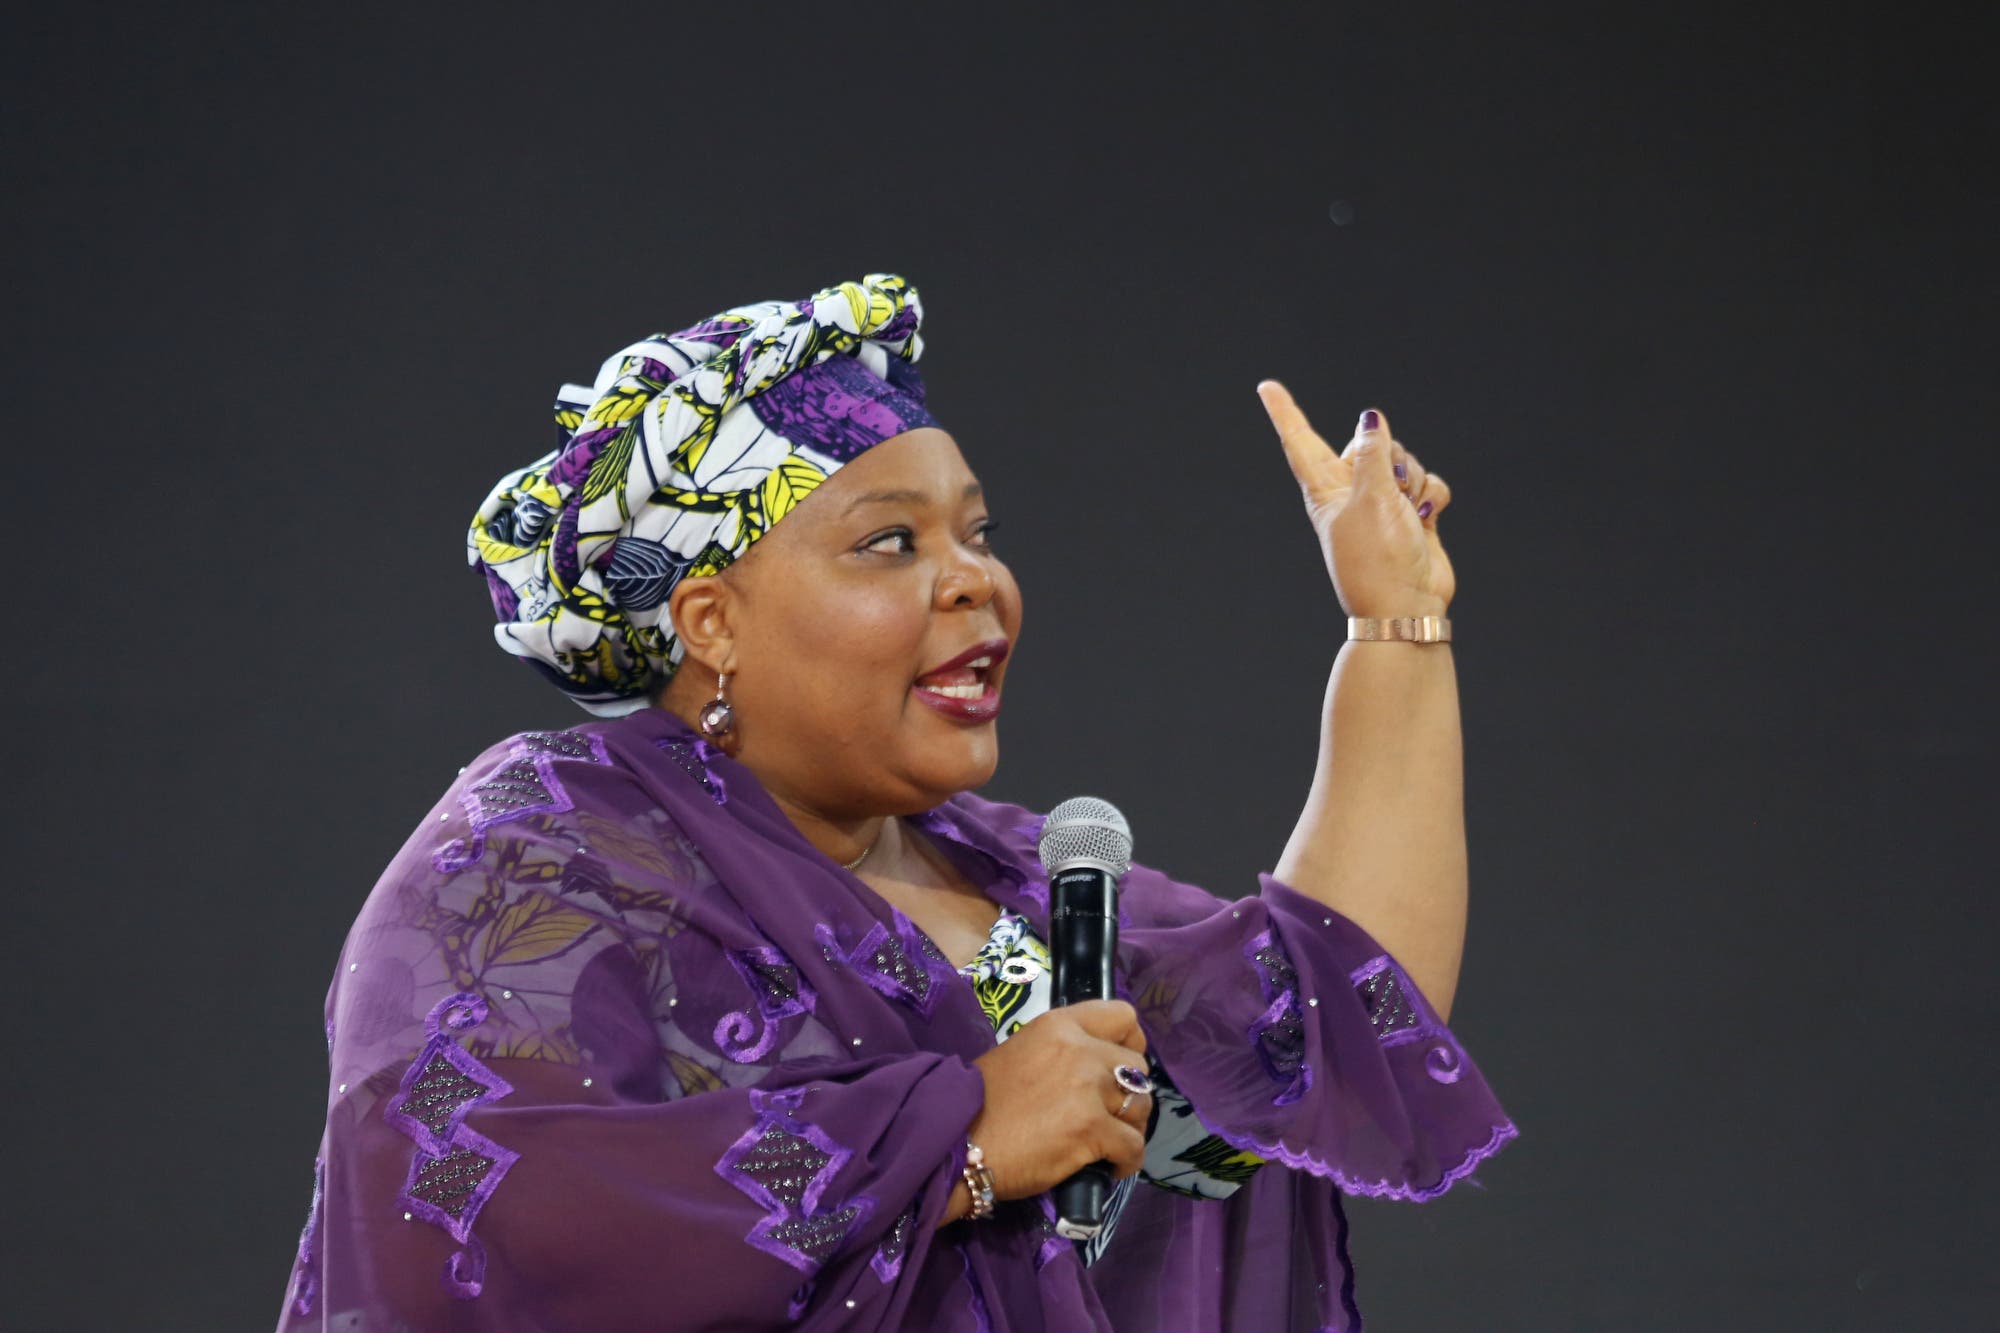 Leymah Gbowee speaks at the Bill and Melinda Gates Foundation Goalkeepers event in Manhattan, New York, US, September 20, 2017. (File photo: Reuters)